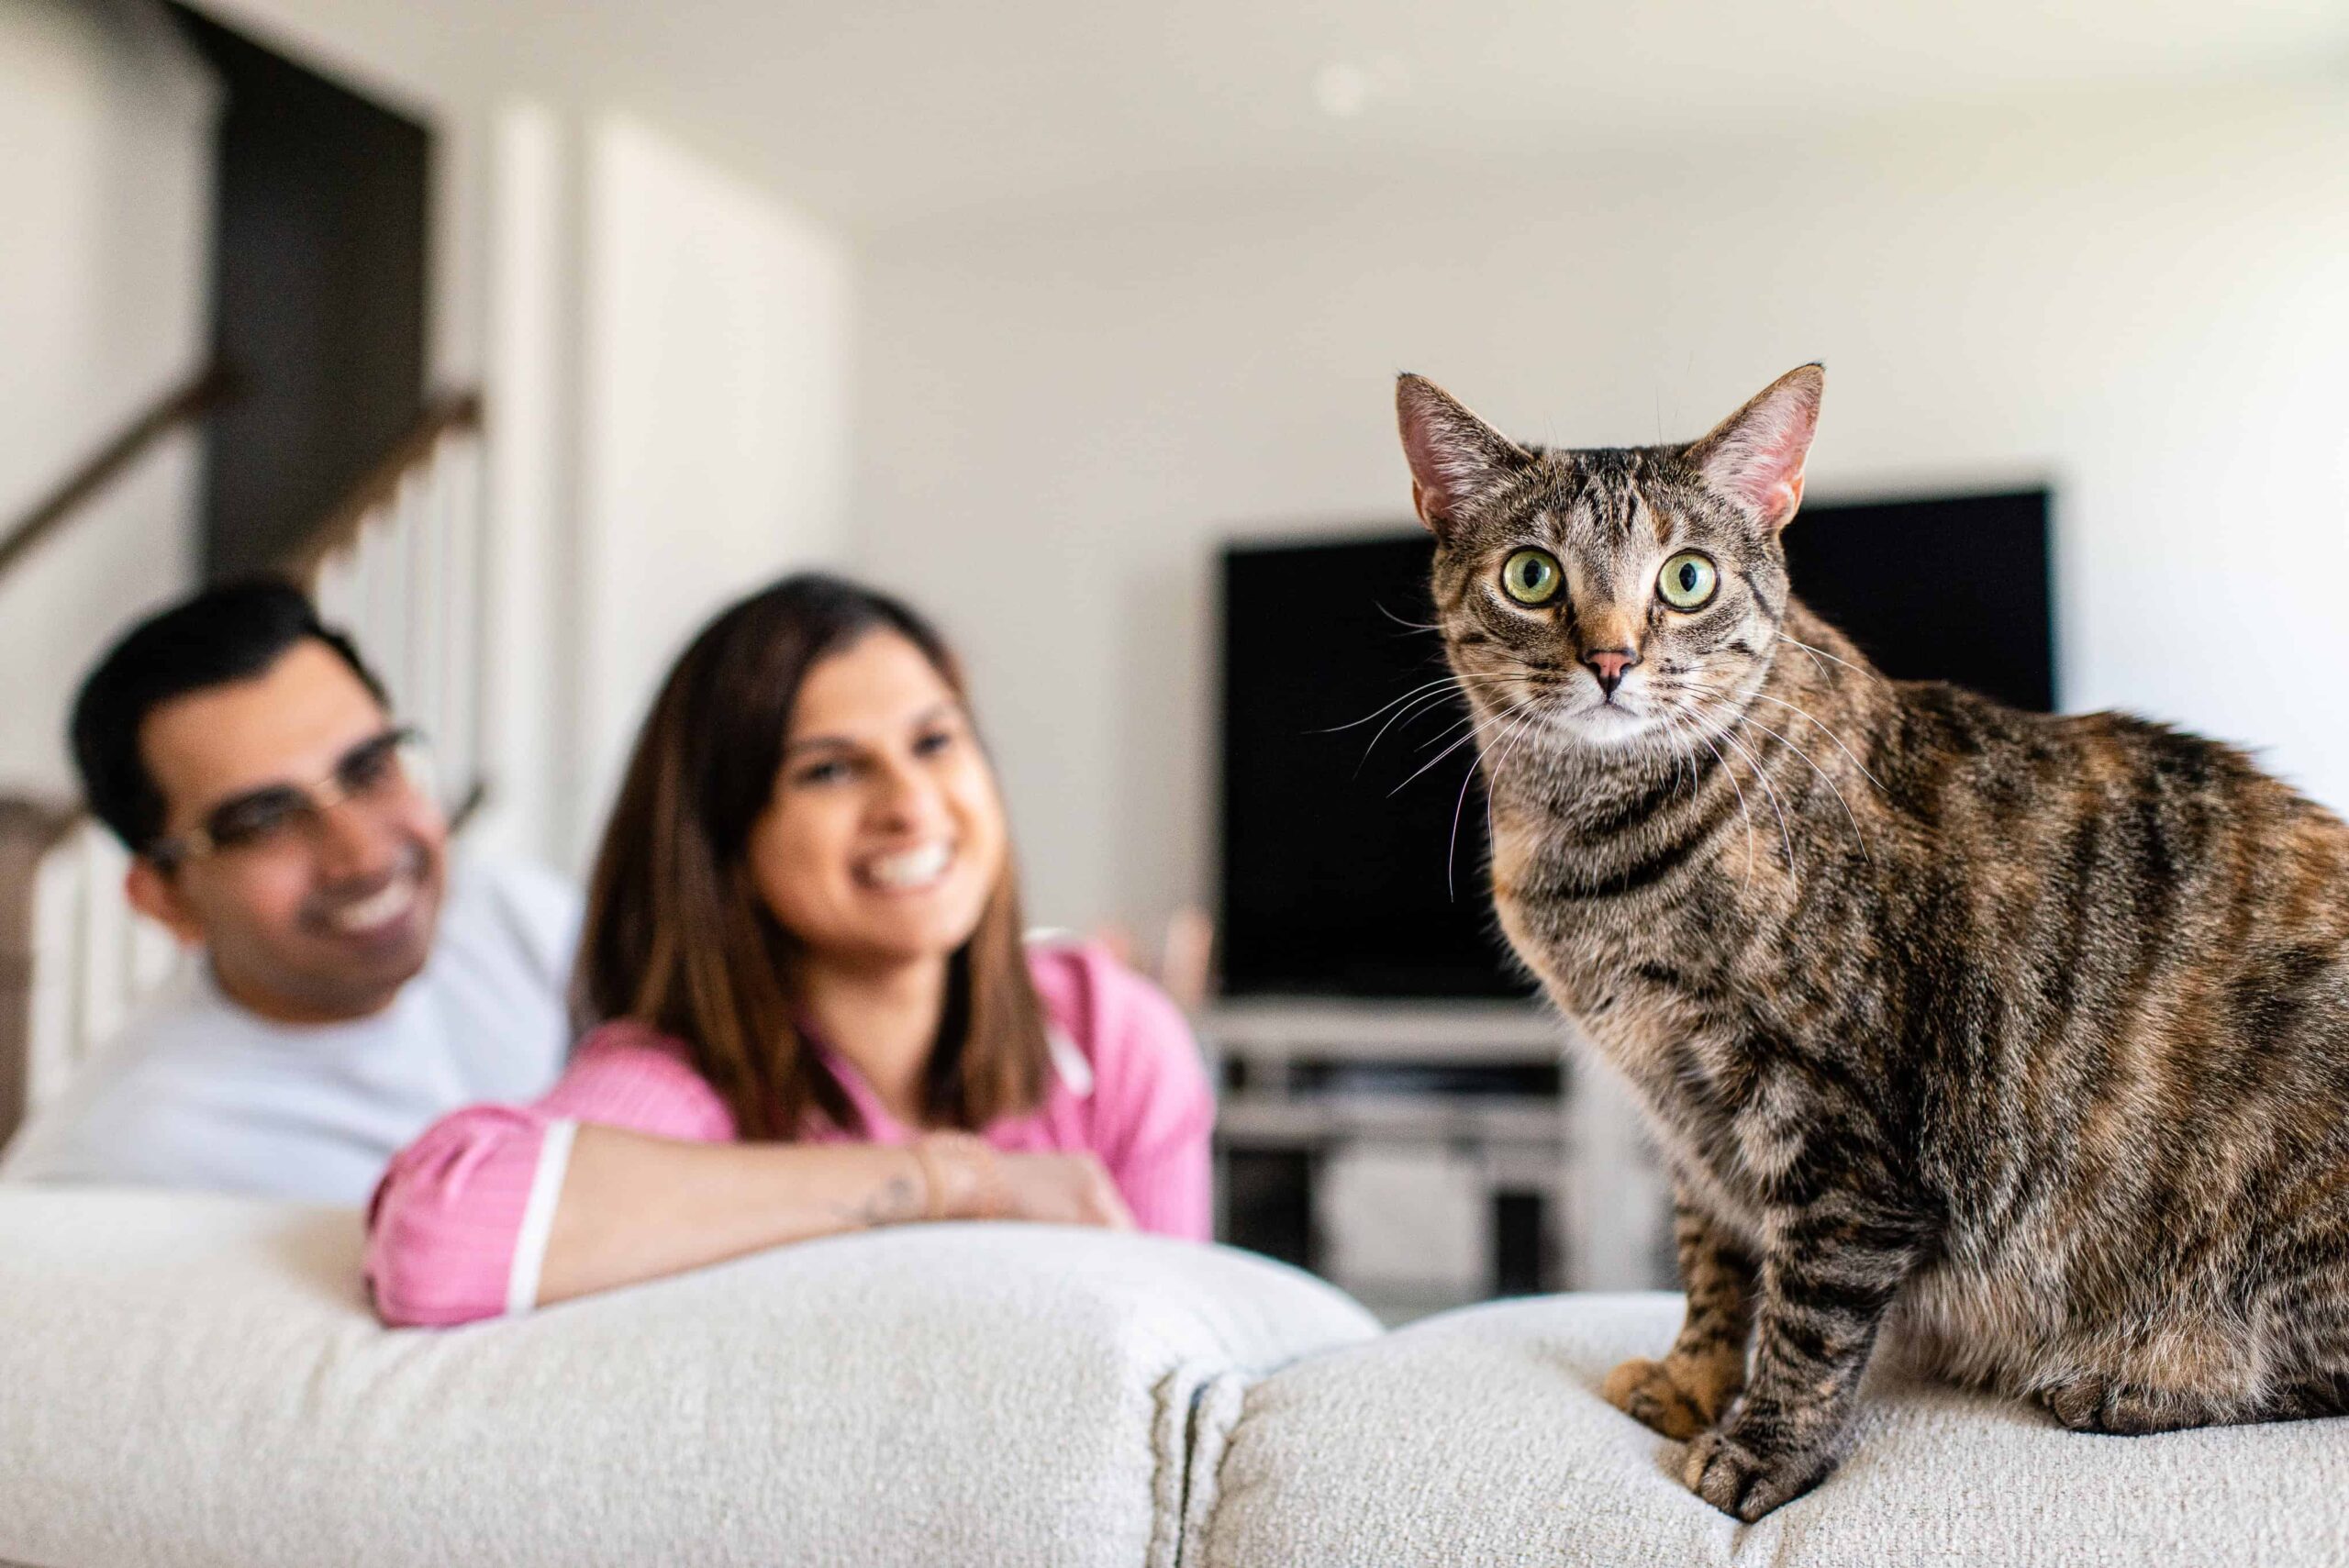 a cat on a couch with a man and woman in the background